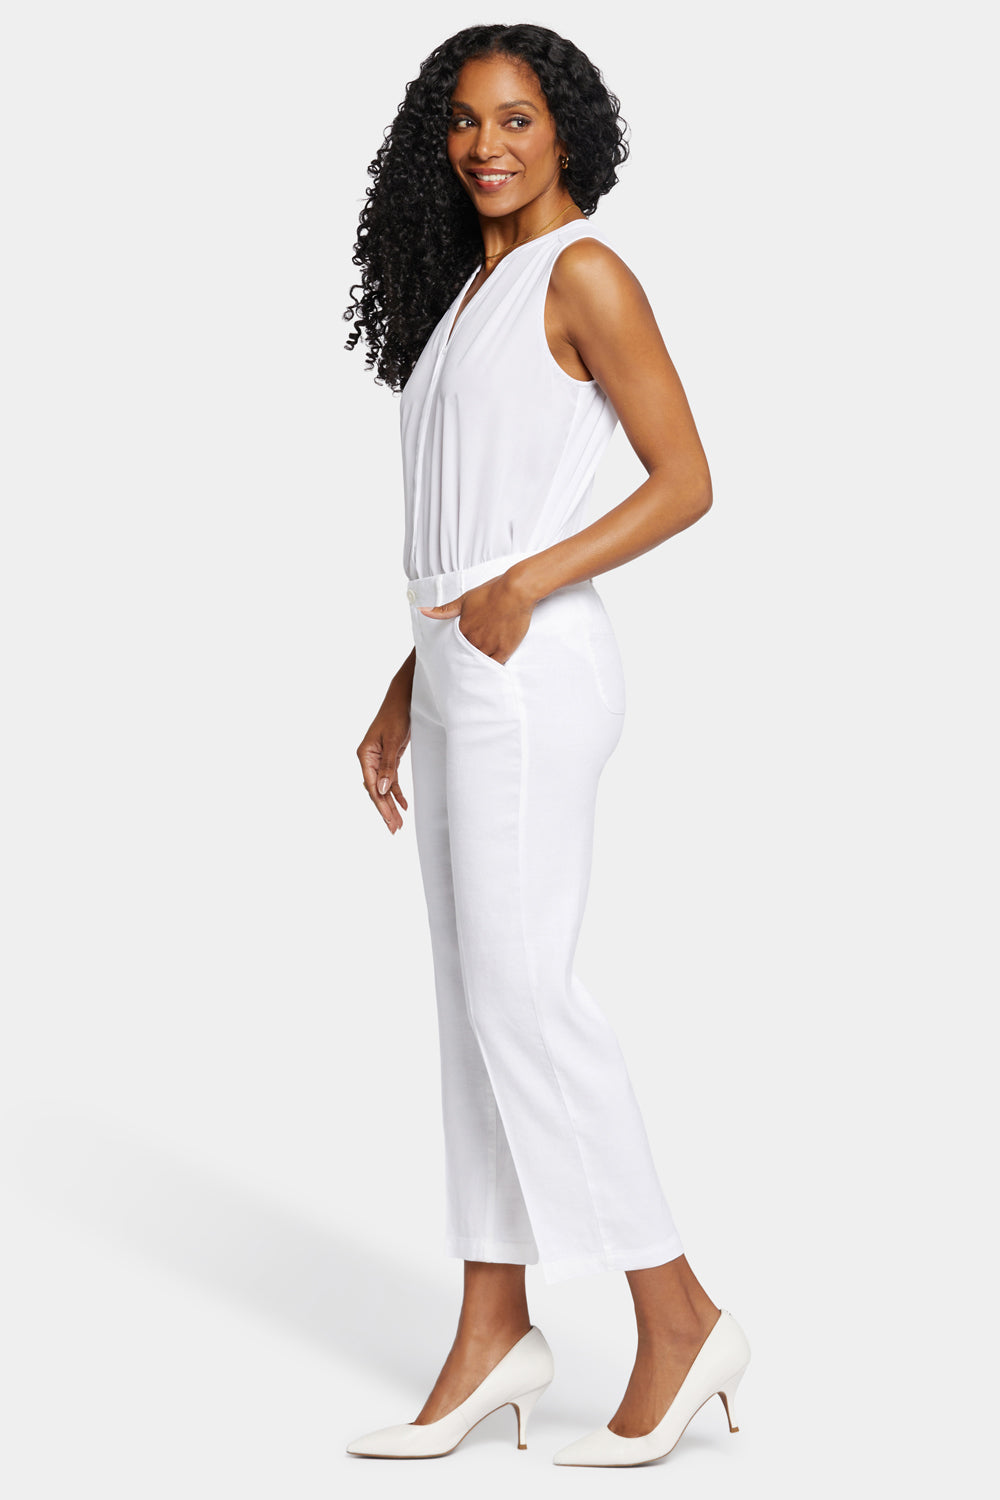 NYDJ Marilyn Straight Ankle Pants In Stretch Linen - Optic White